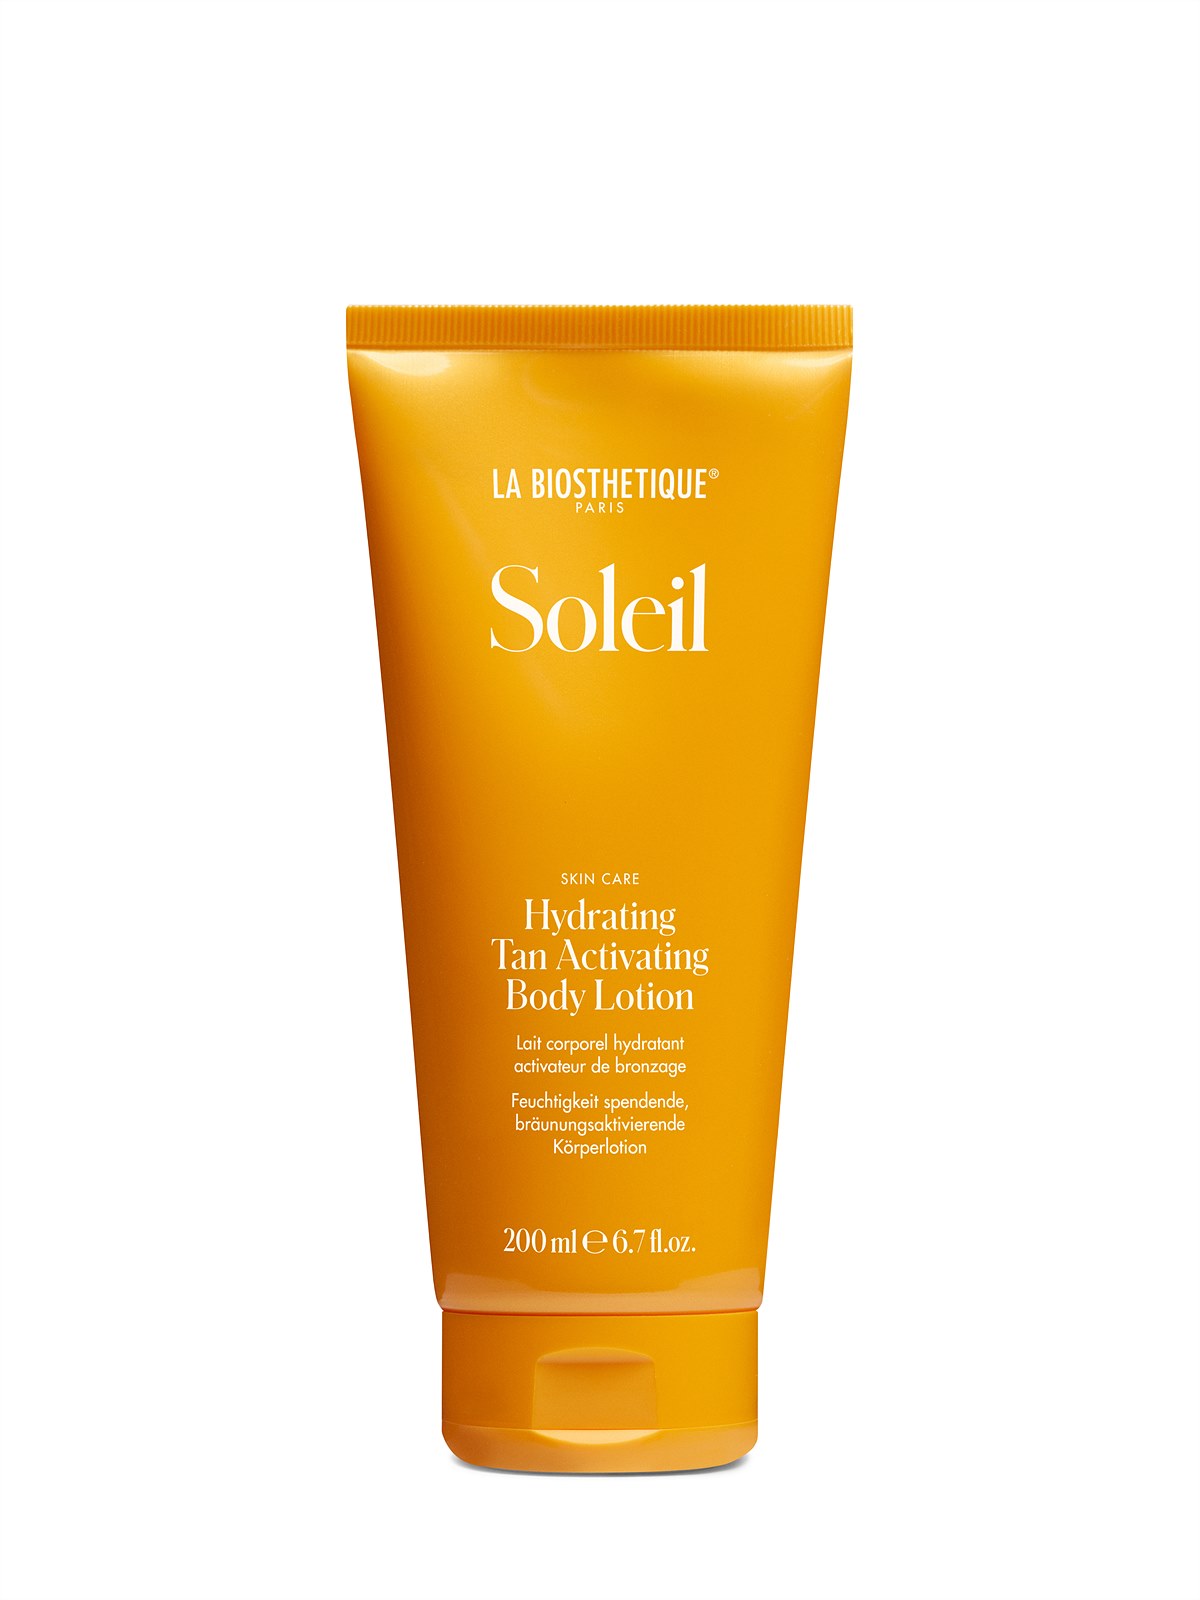 La Biosthétique_Skin-Soleil-Hydrating-Tan-Activating-Body-Lotion-200ml_EUR 31,00